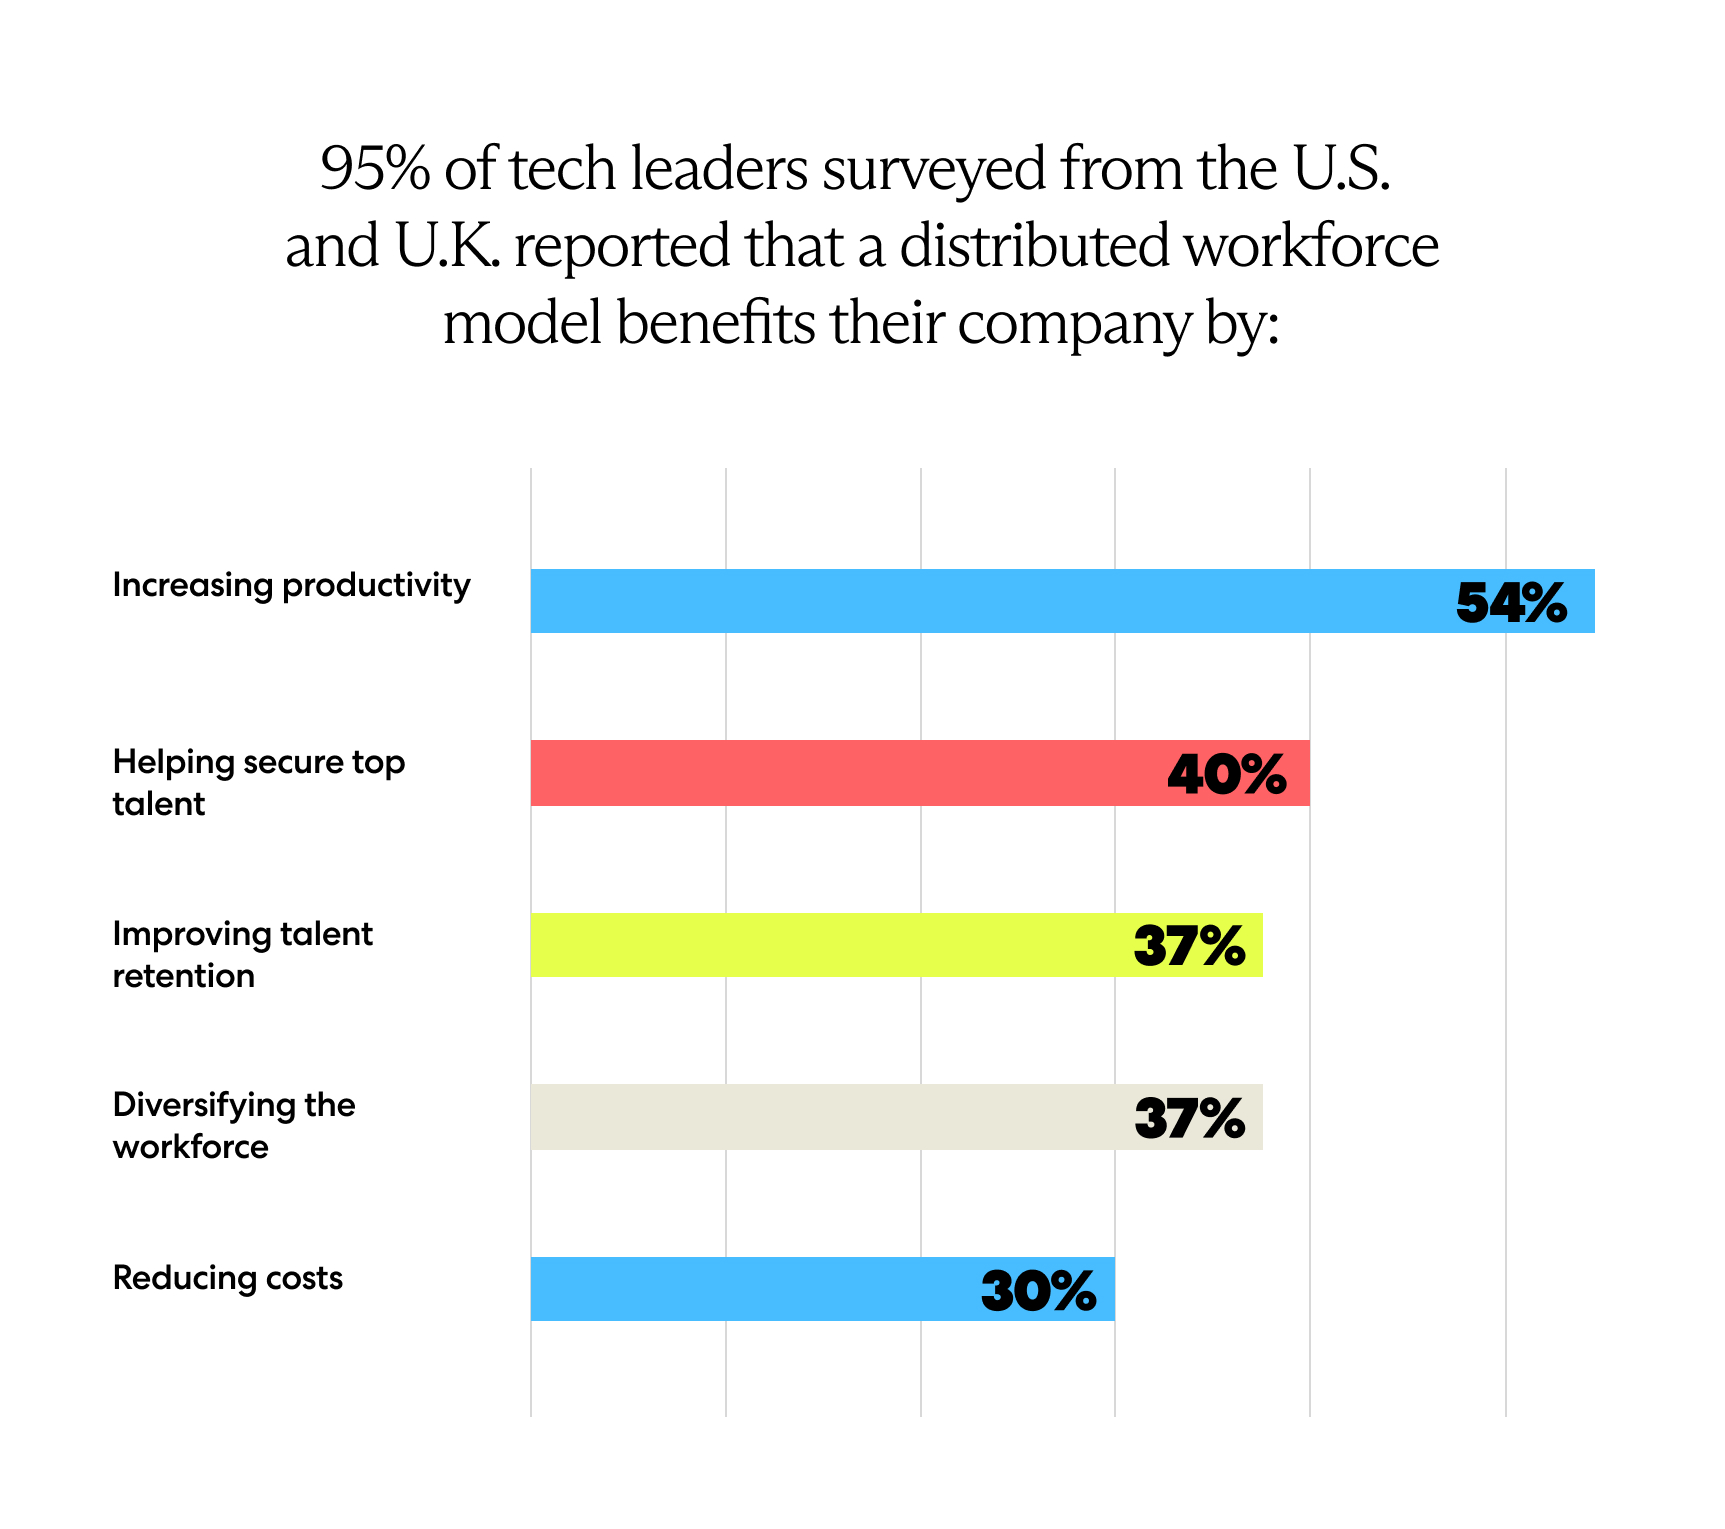 95% of tech leaders reported that a distributed workforce model benefits their company 